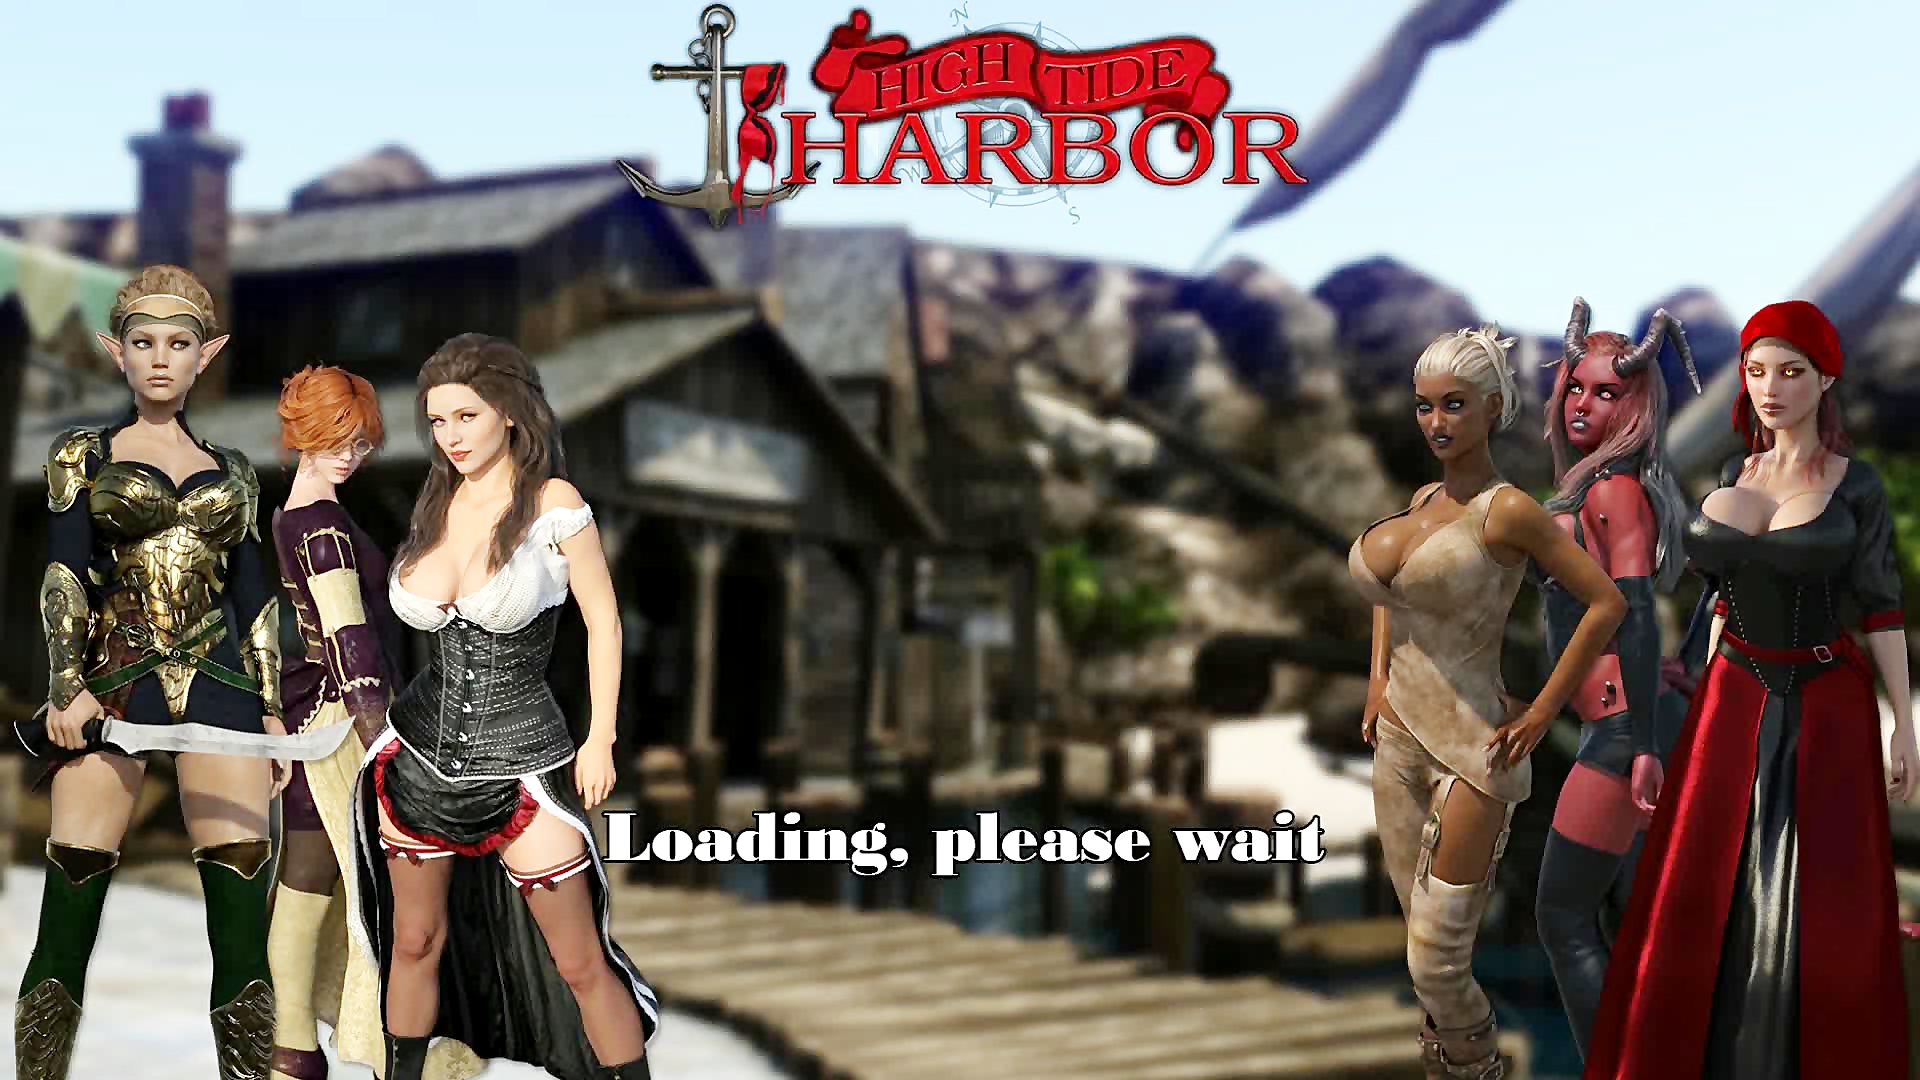 Let's Play High Tide Harbor 3D Sex Game Playthrough! Out Now at Affect3D